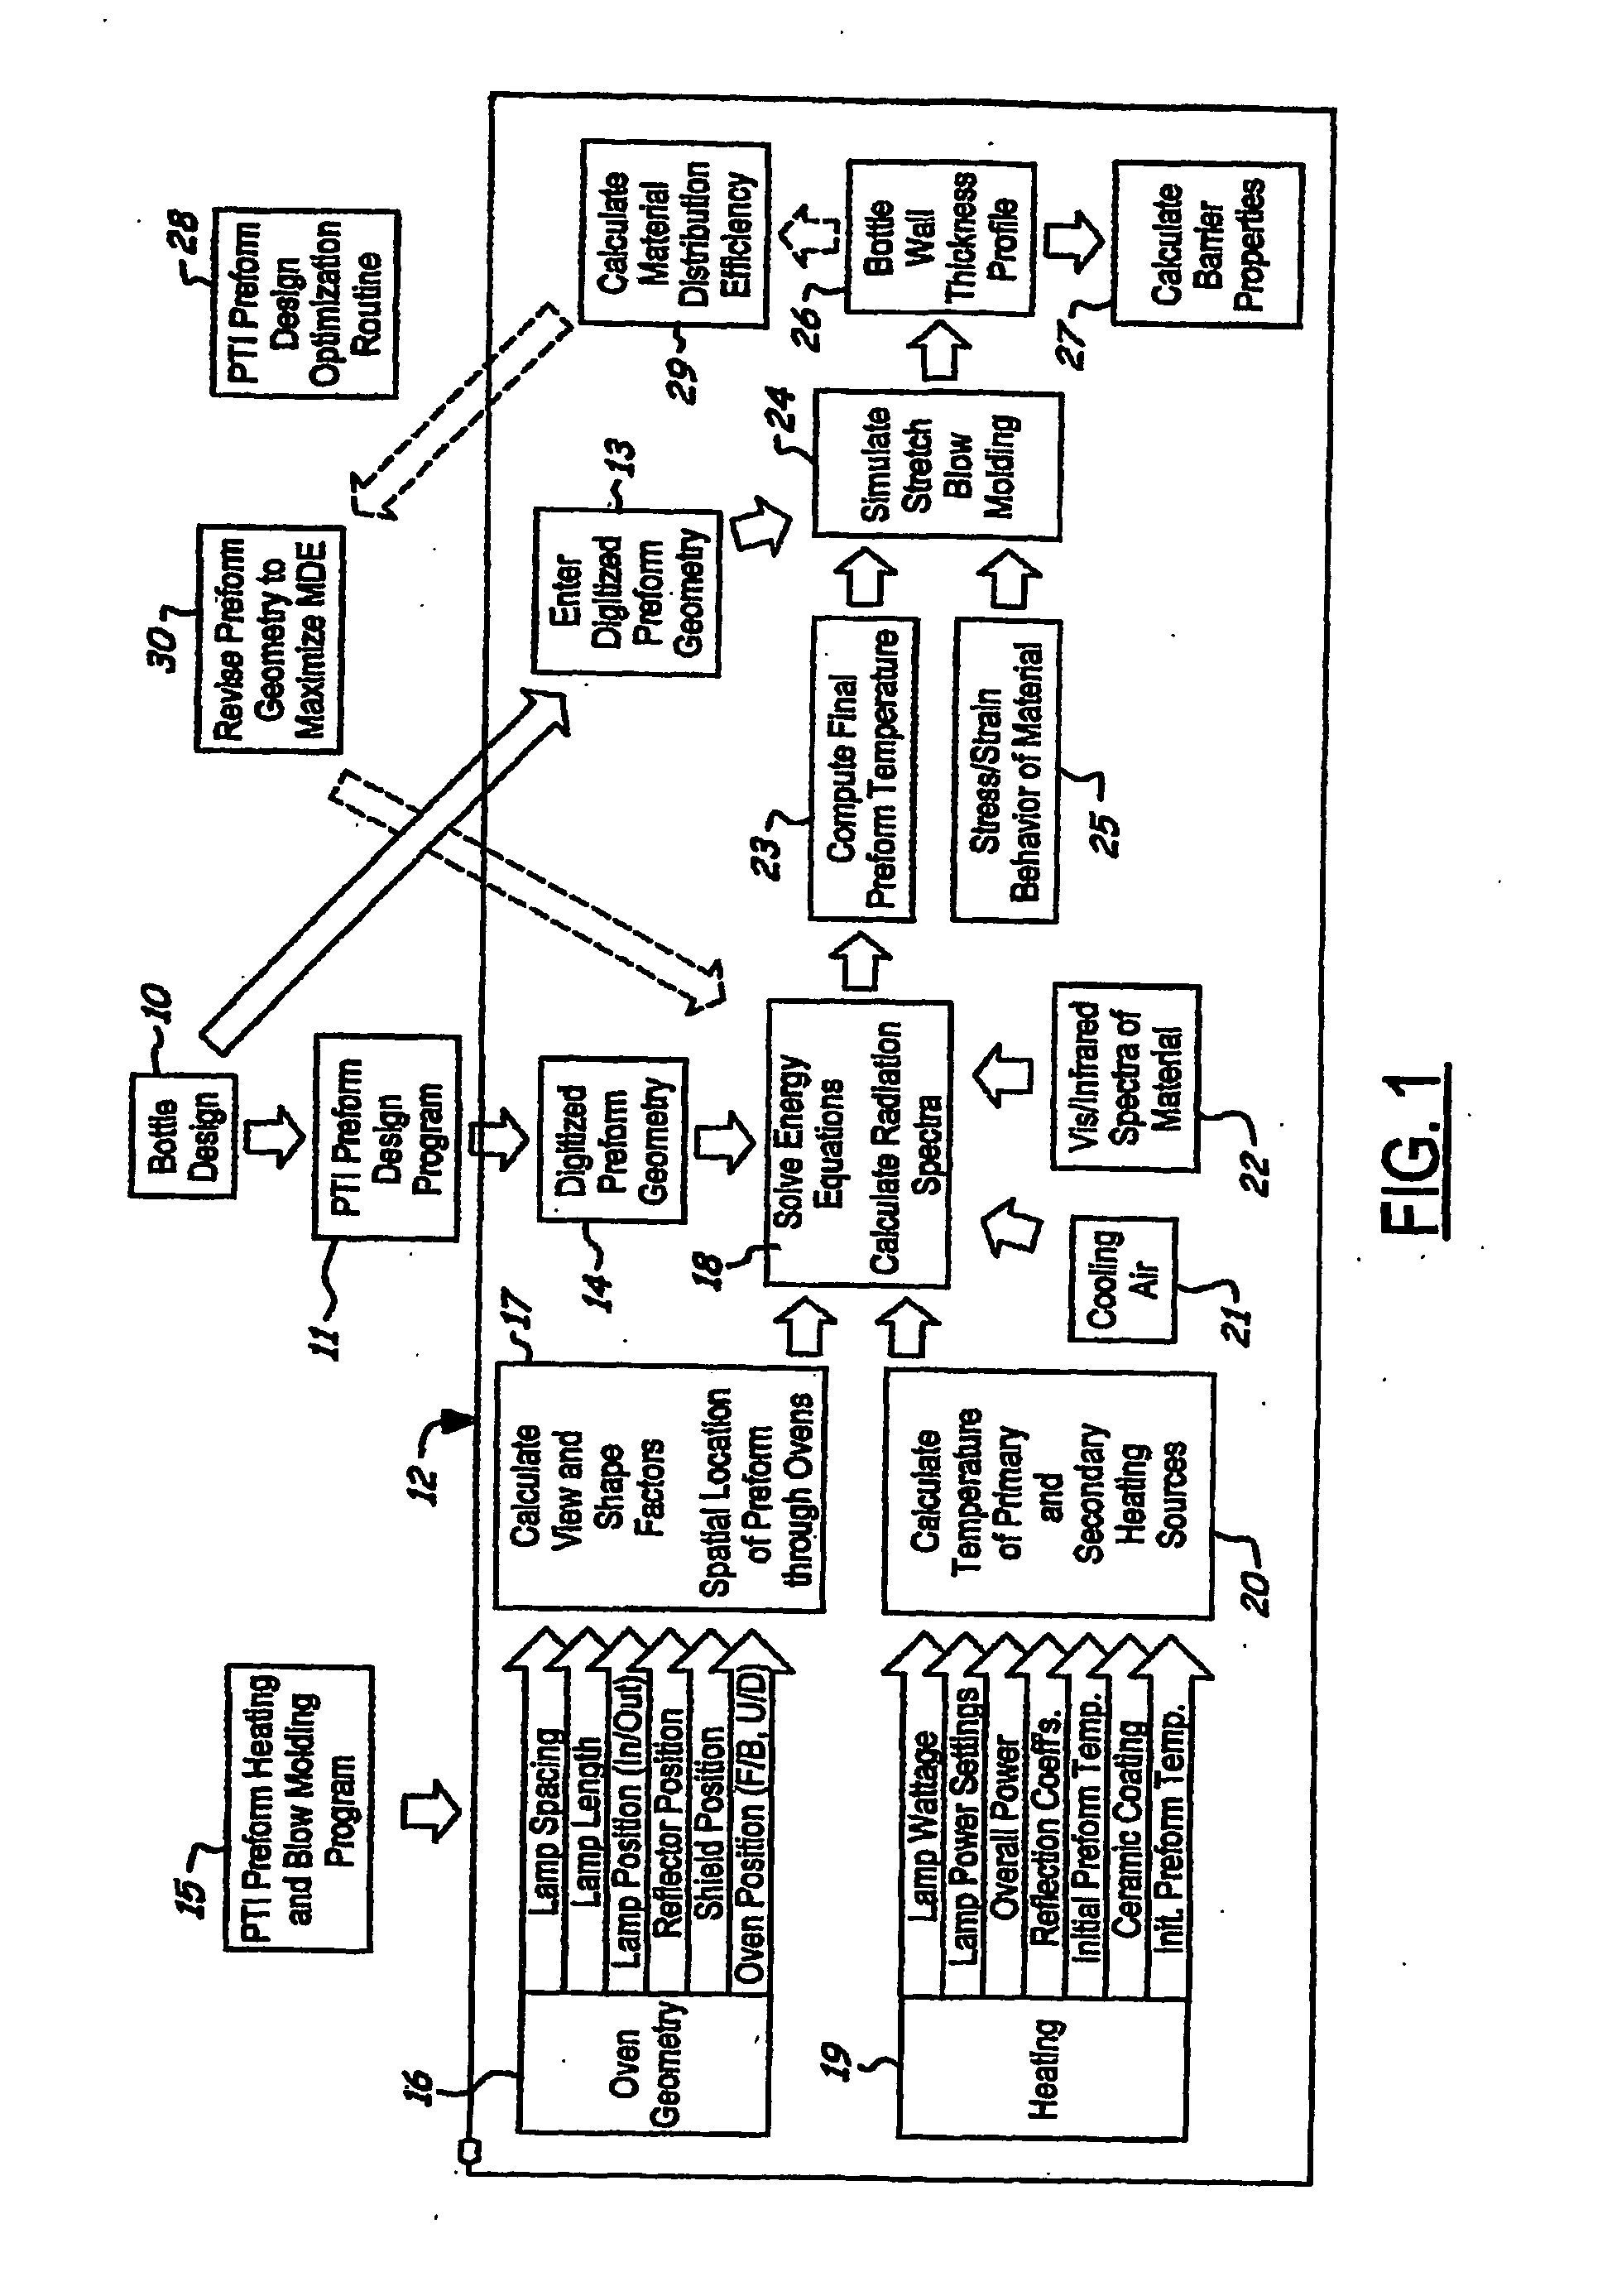 Apparatus and method for virtual prototyping of blow molded objects